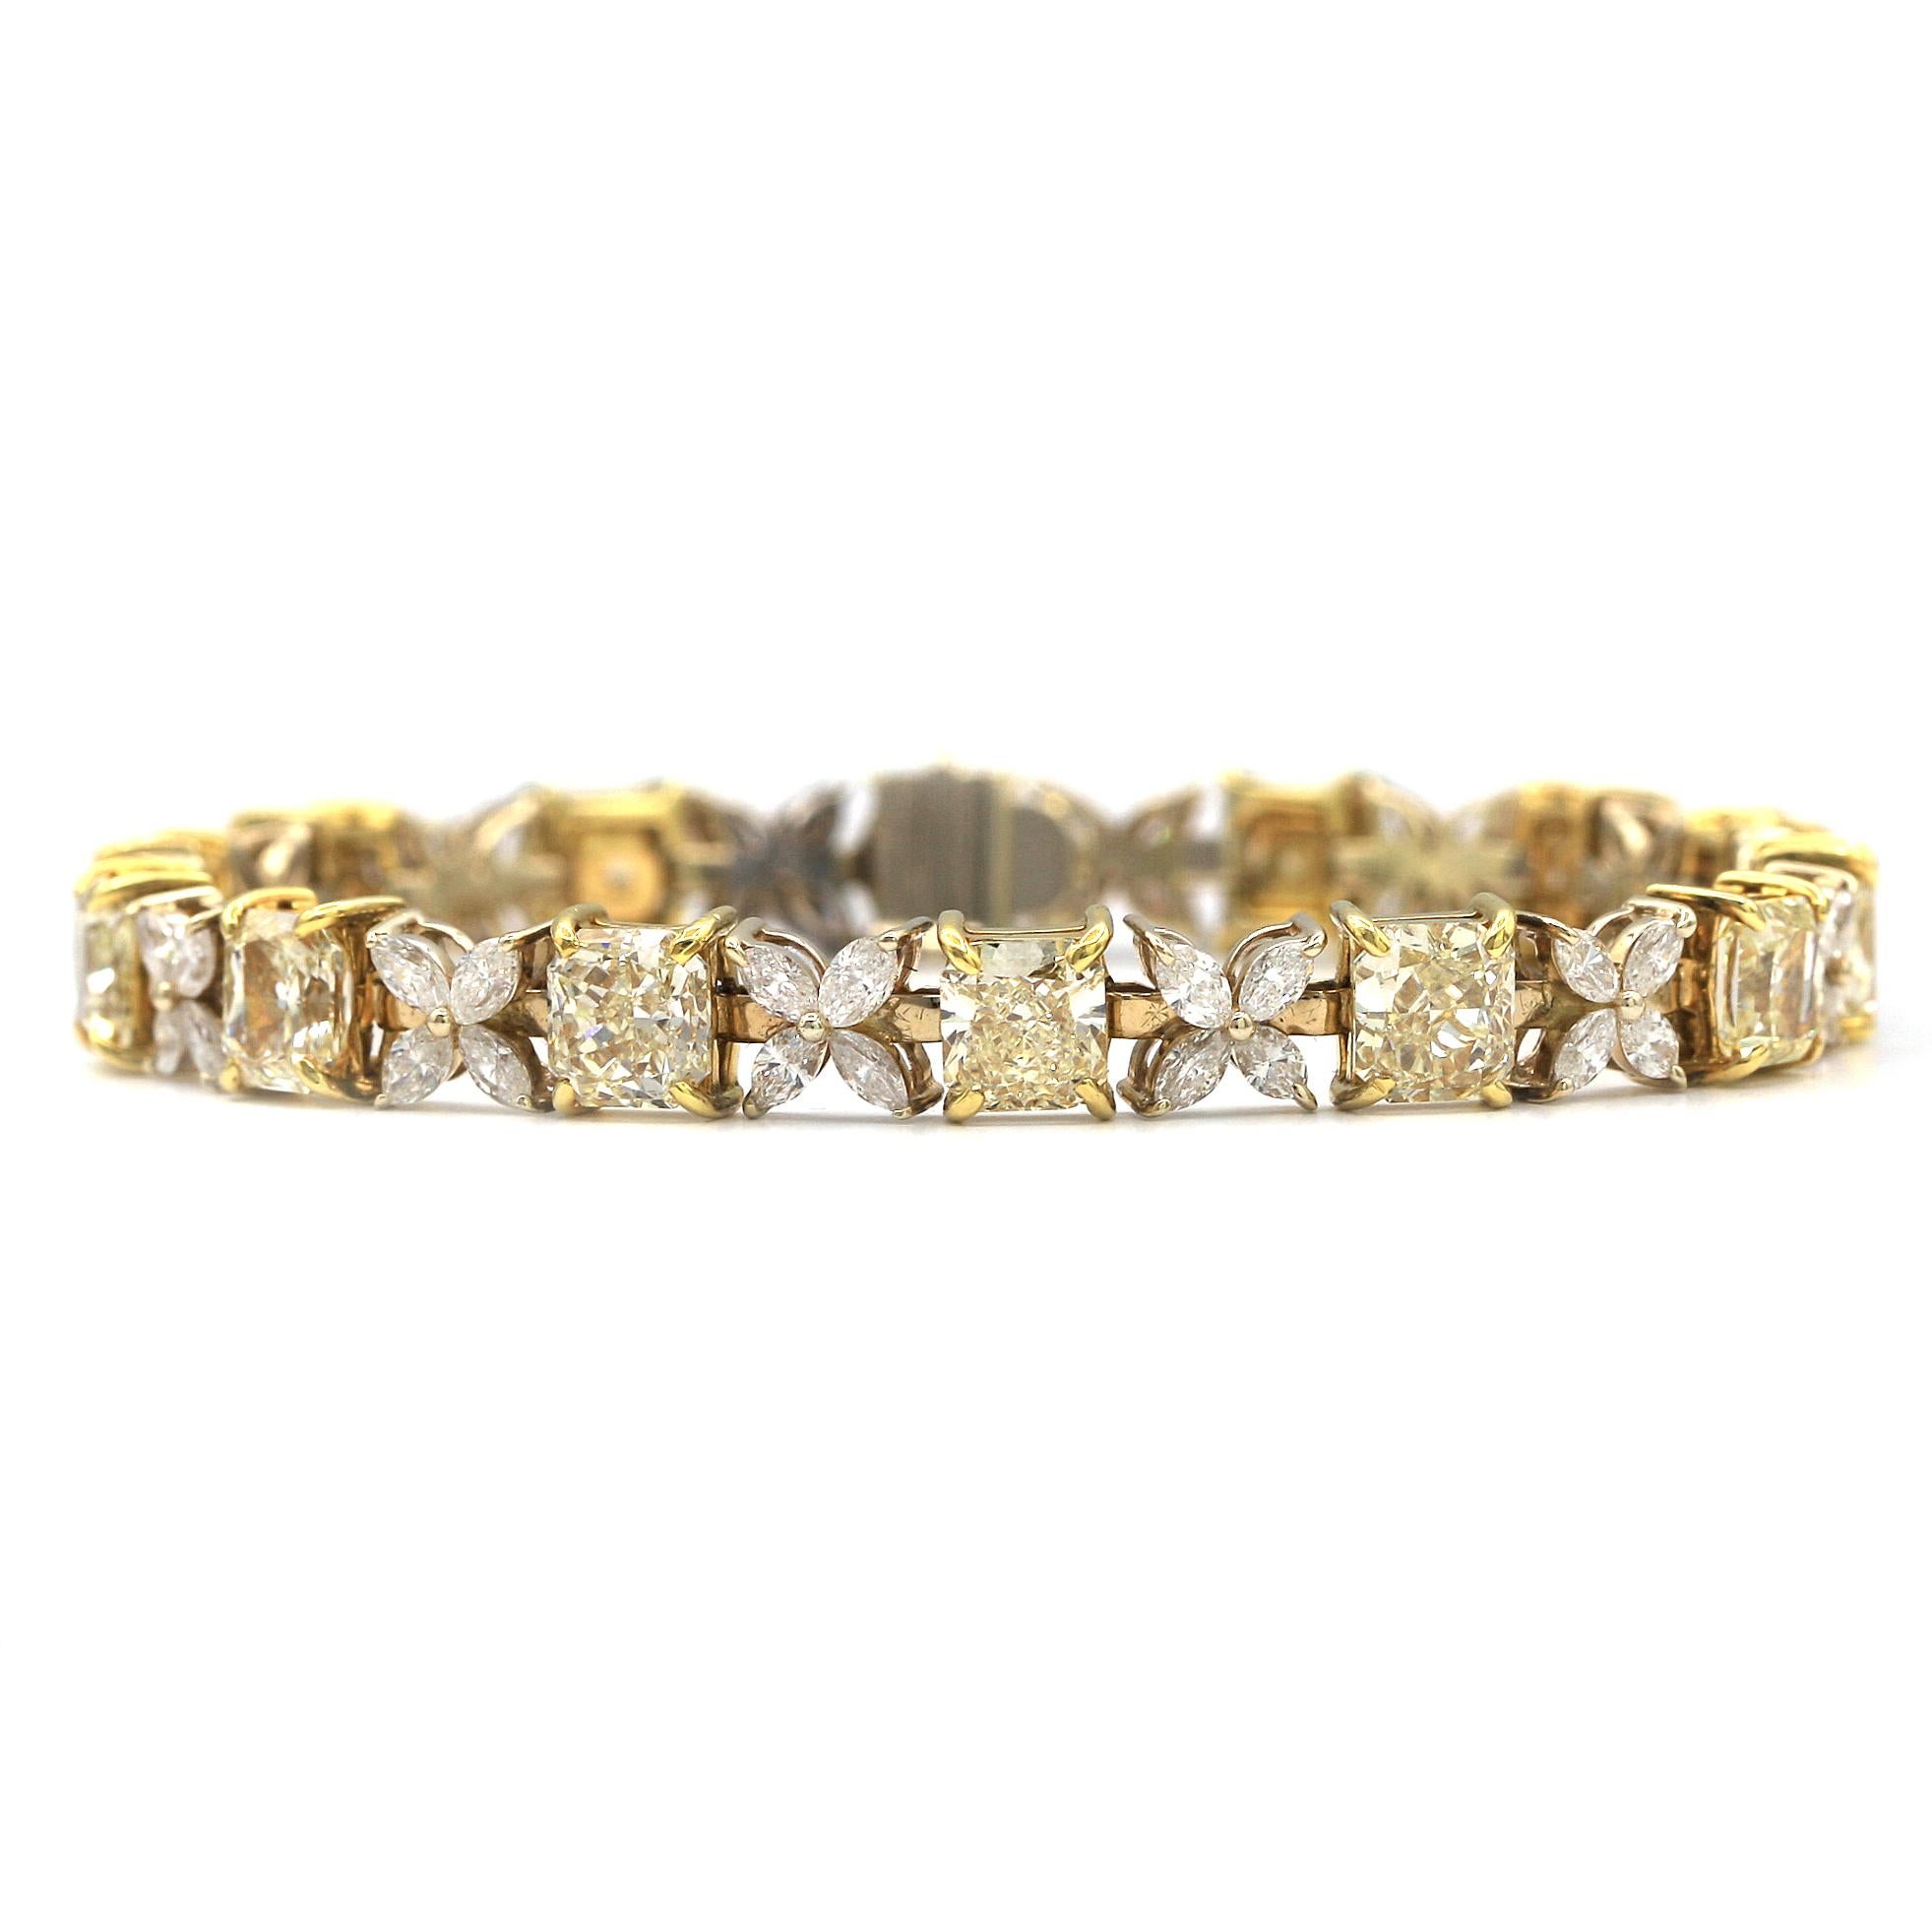 This beautiful floral shape bracelet features 14 Radiant shape Fancy Yellow Diamonds and 56 White Marquee shape diamonds giving it a total weight of 13.99 carats. It mounted in 18K Yellow Gold.
Length is 7 inches 